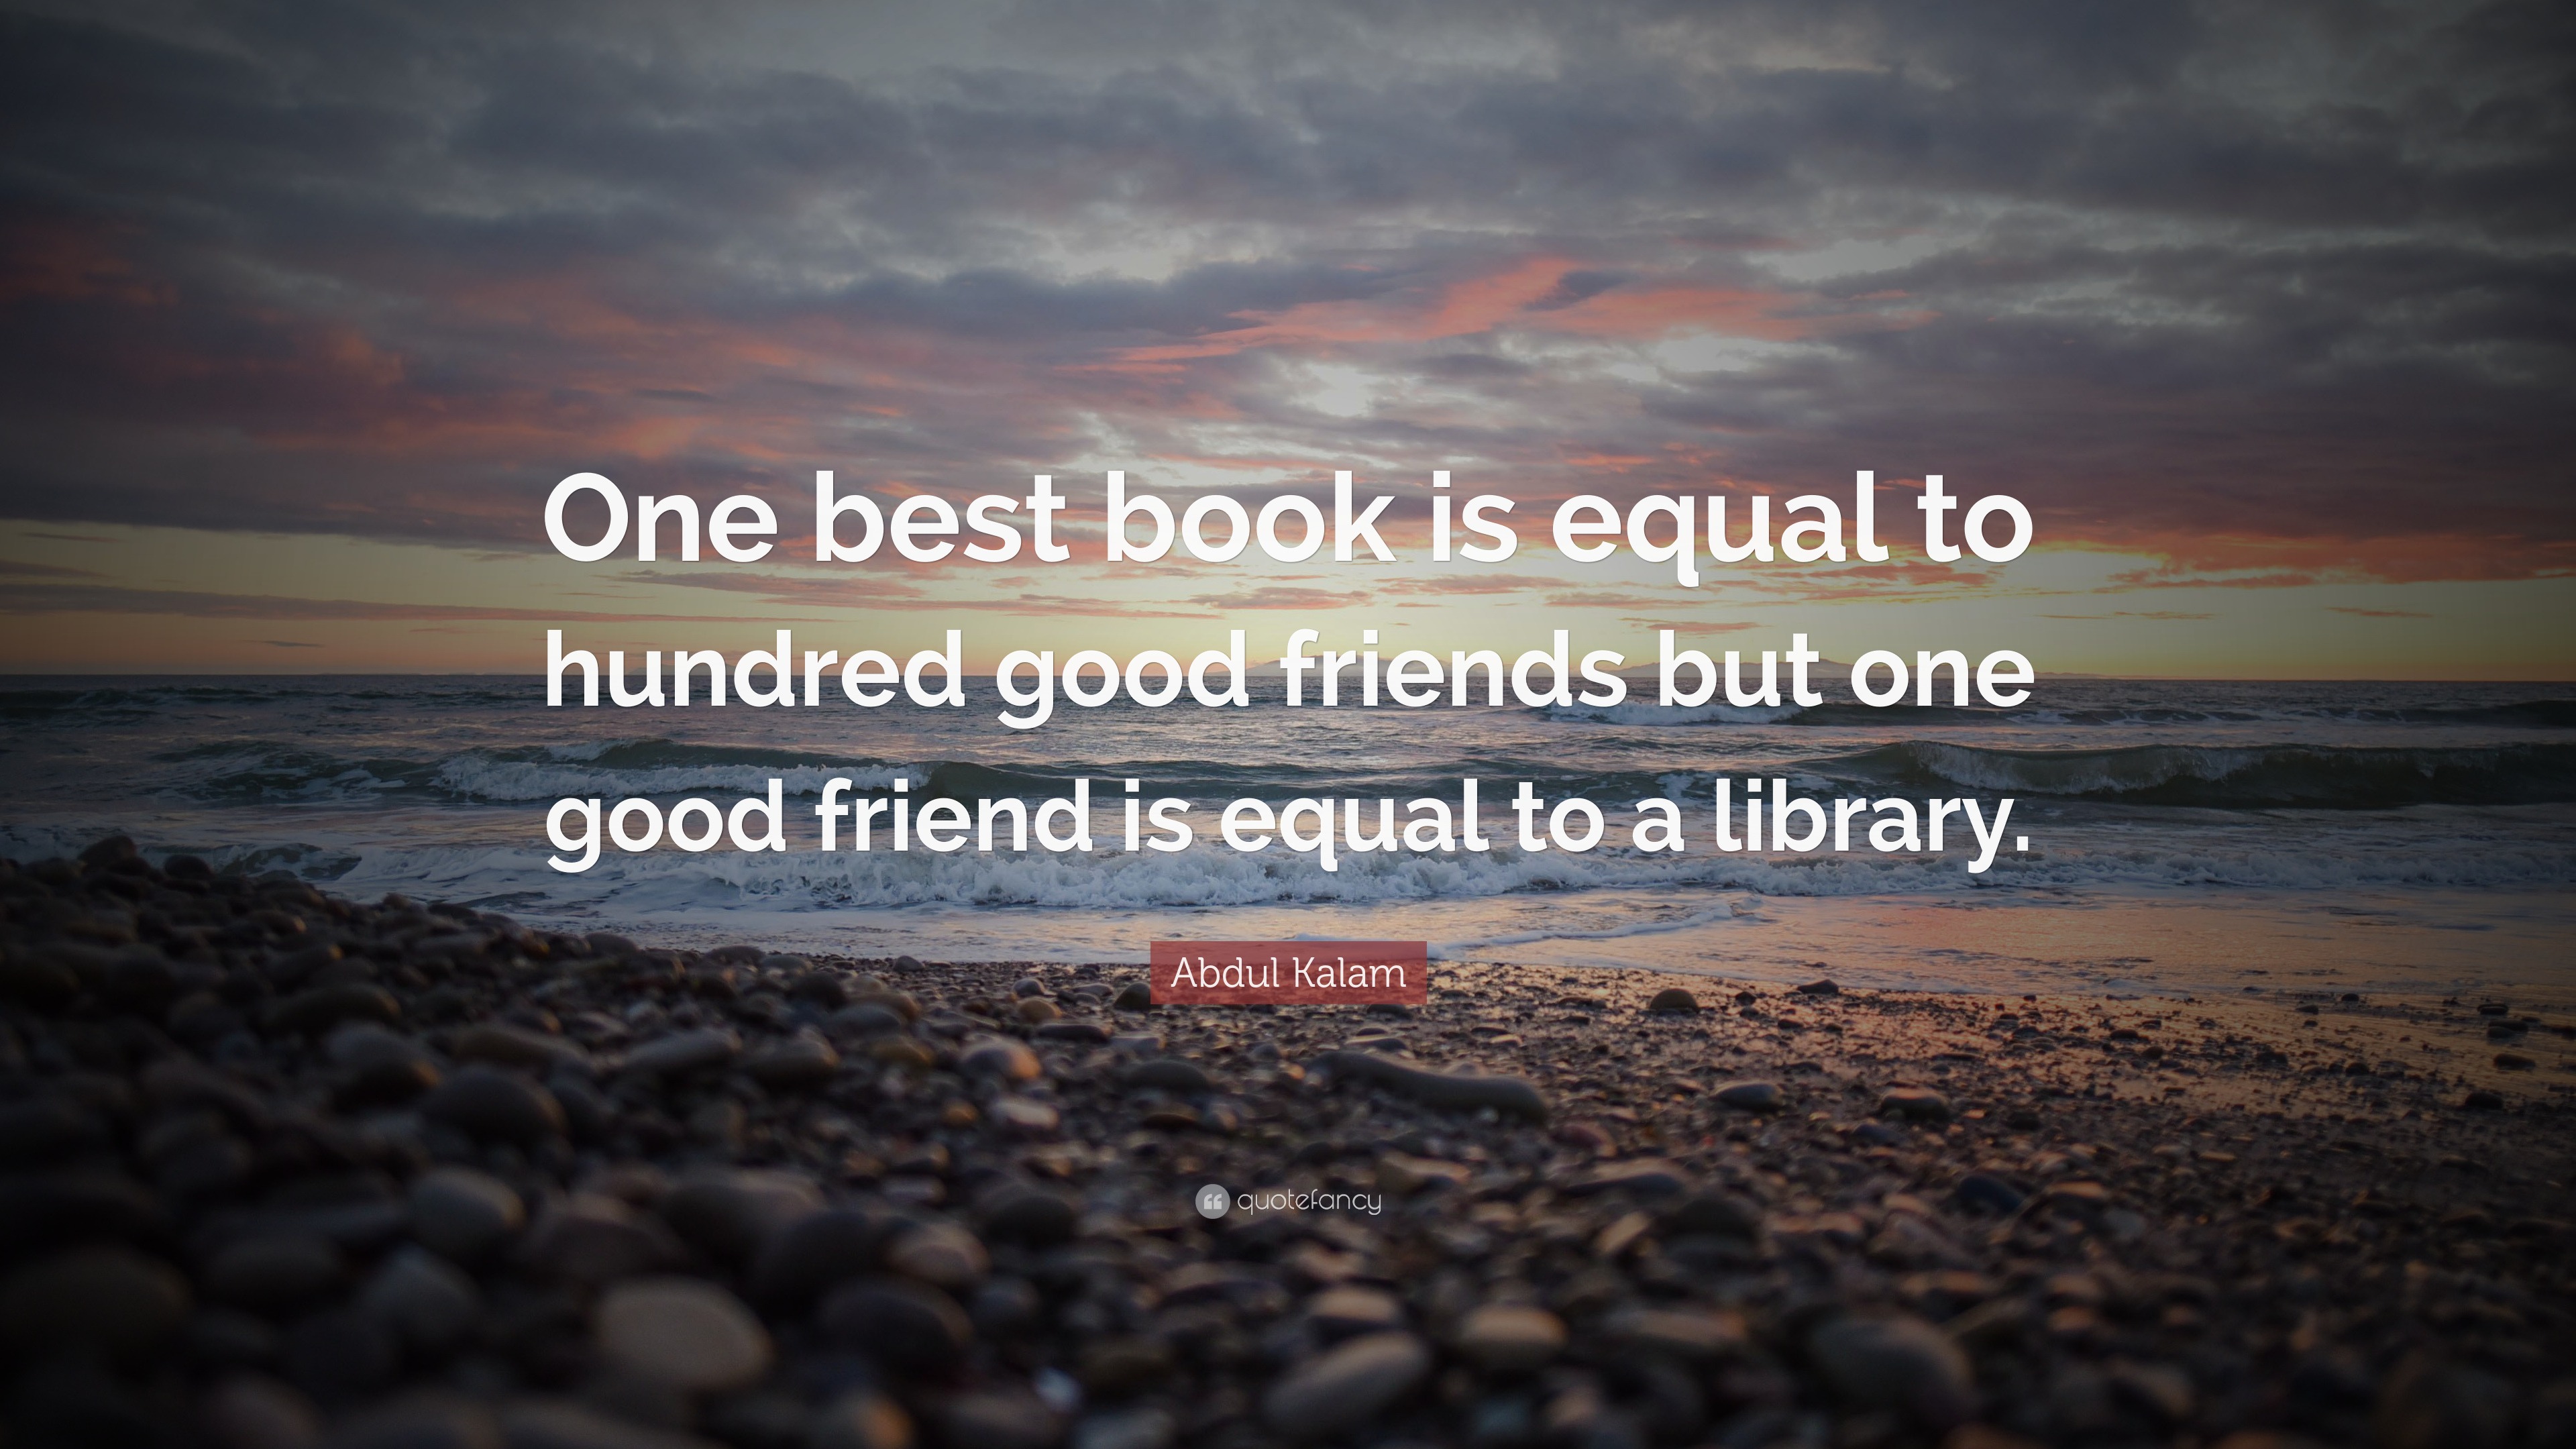 Abdul Kalam Quote “One best book is equal to hundred good